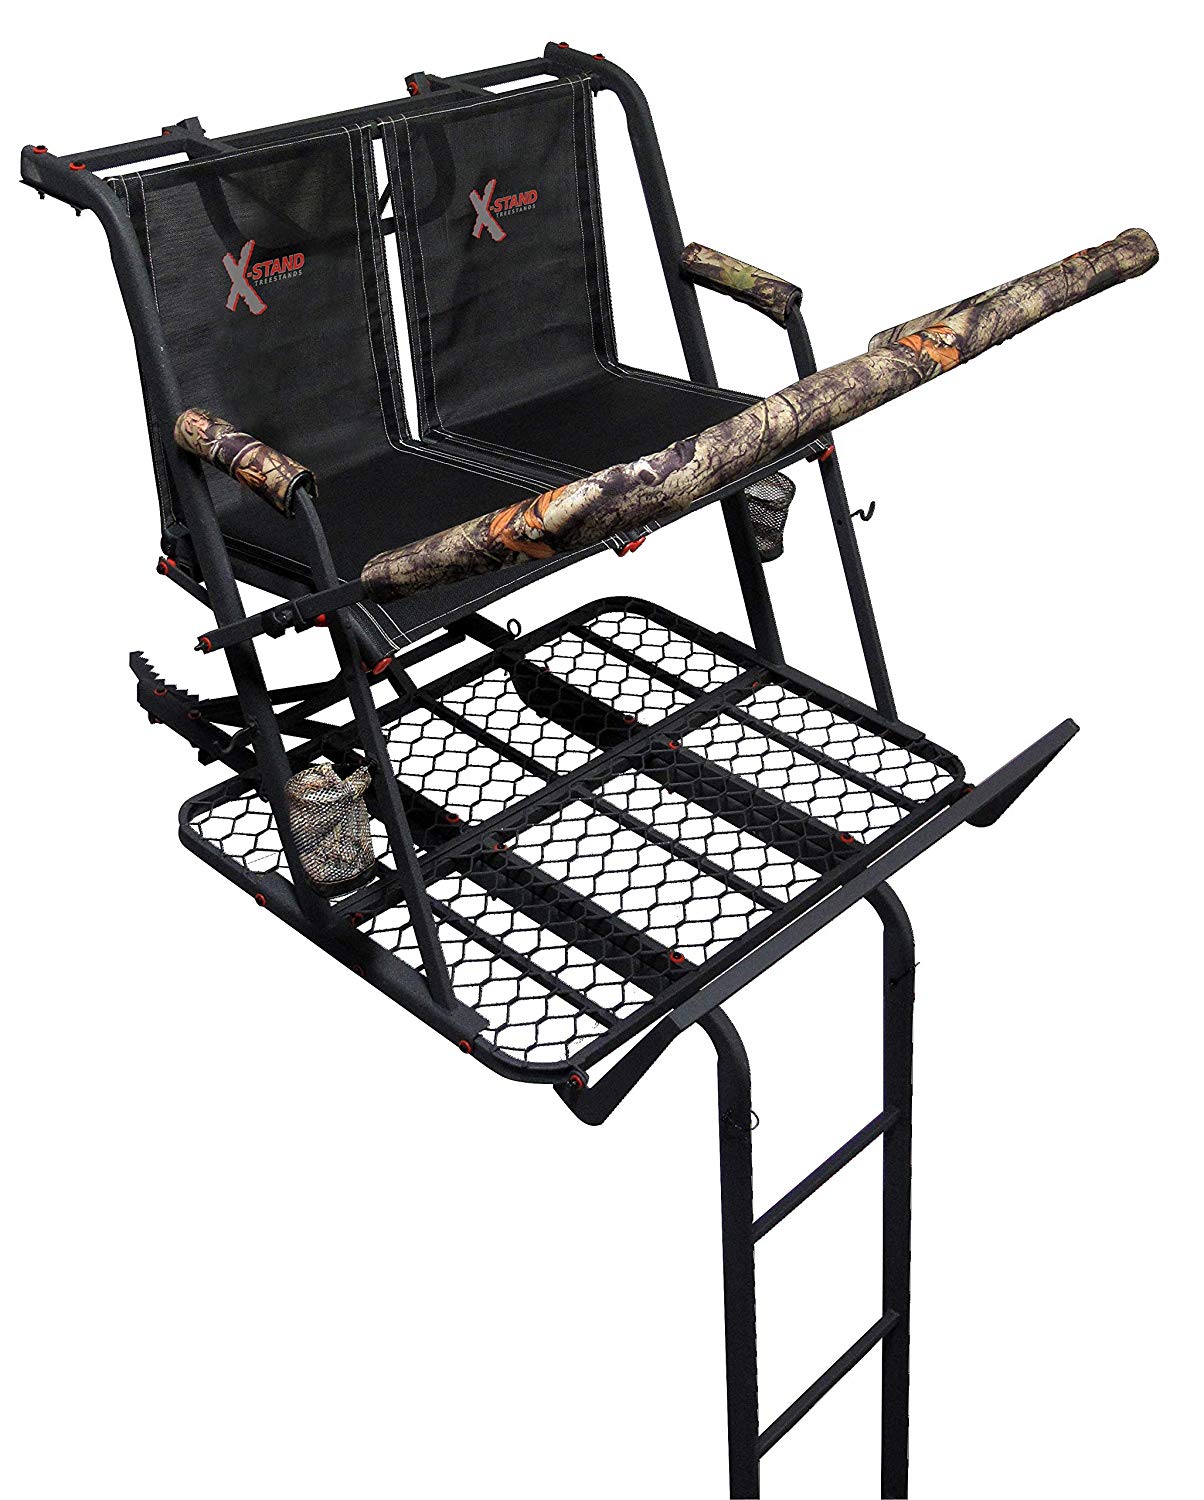 X-Stand Treestands The Jayhawk 20' Hunting Tree Stand